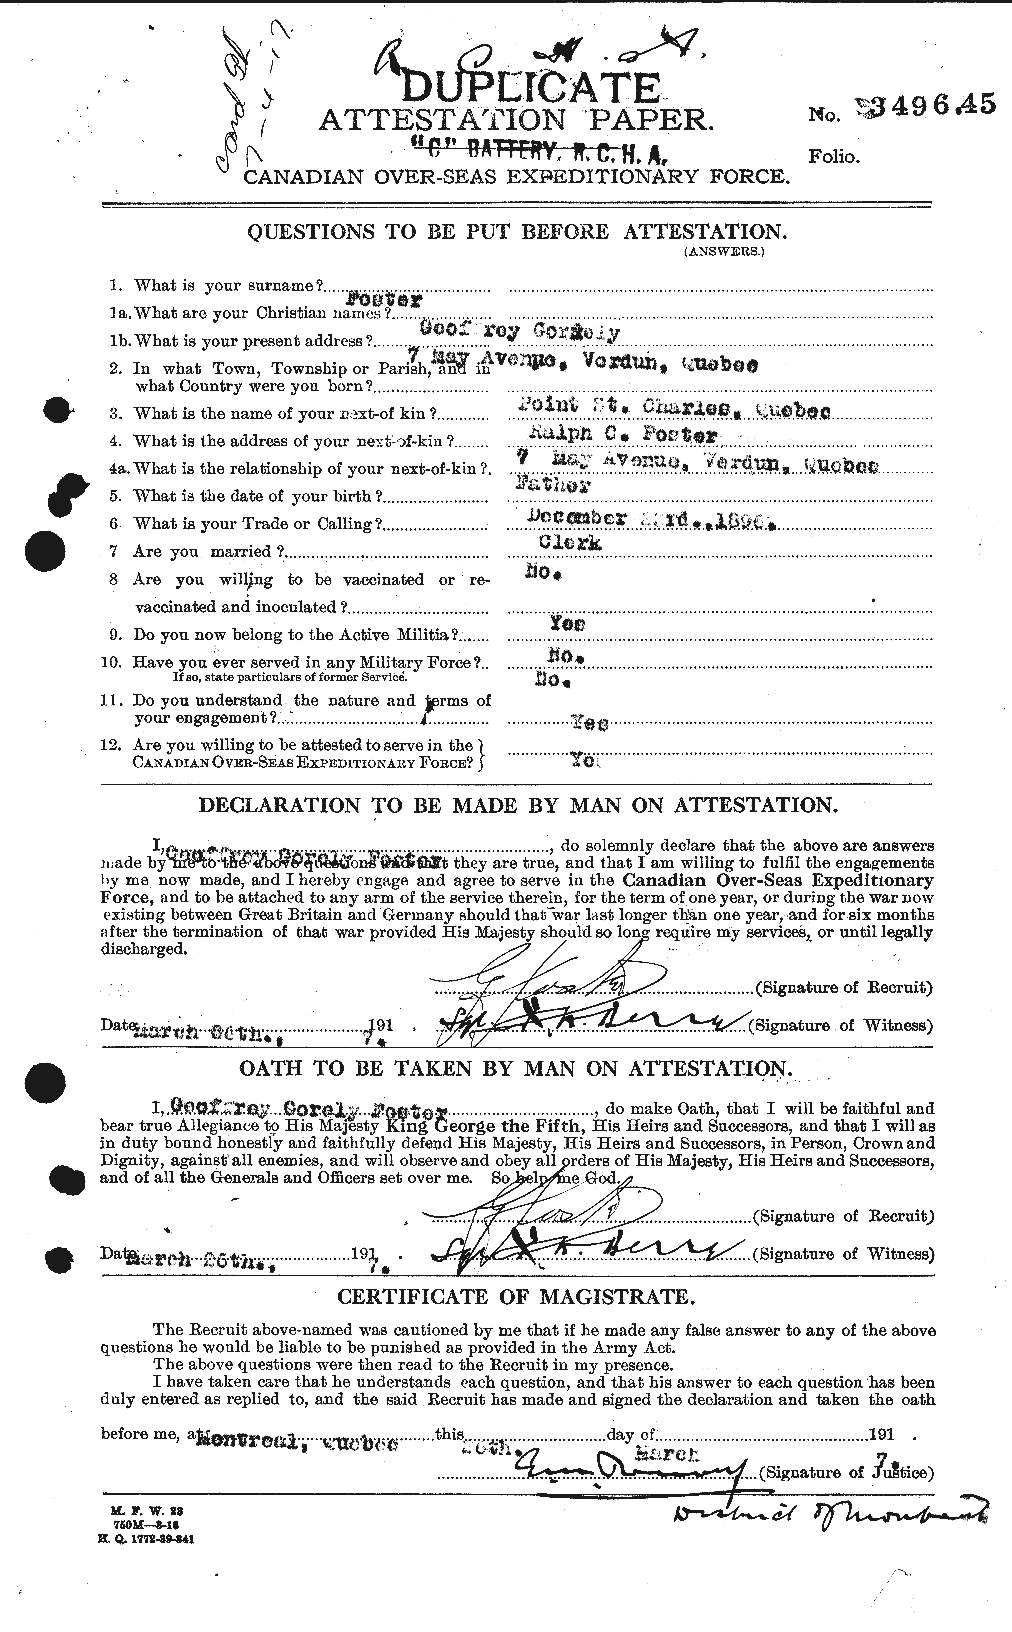 Personnel Records of the First World War - CEF 330660a